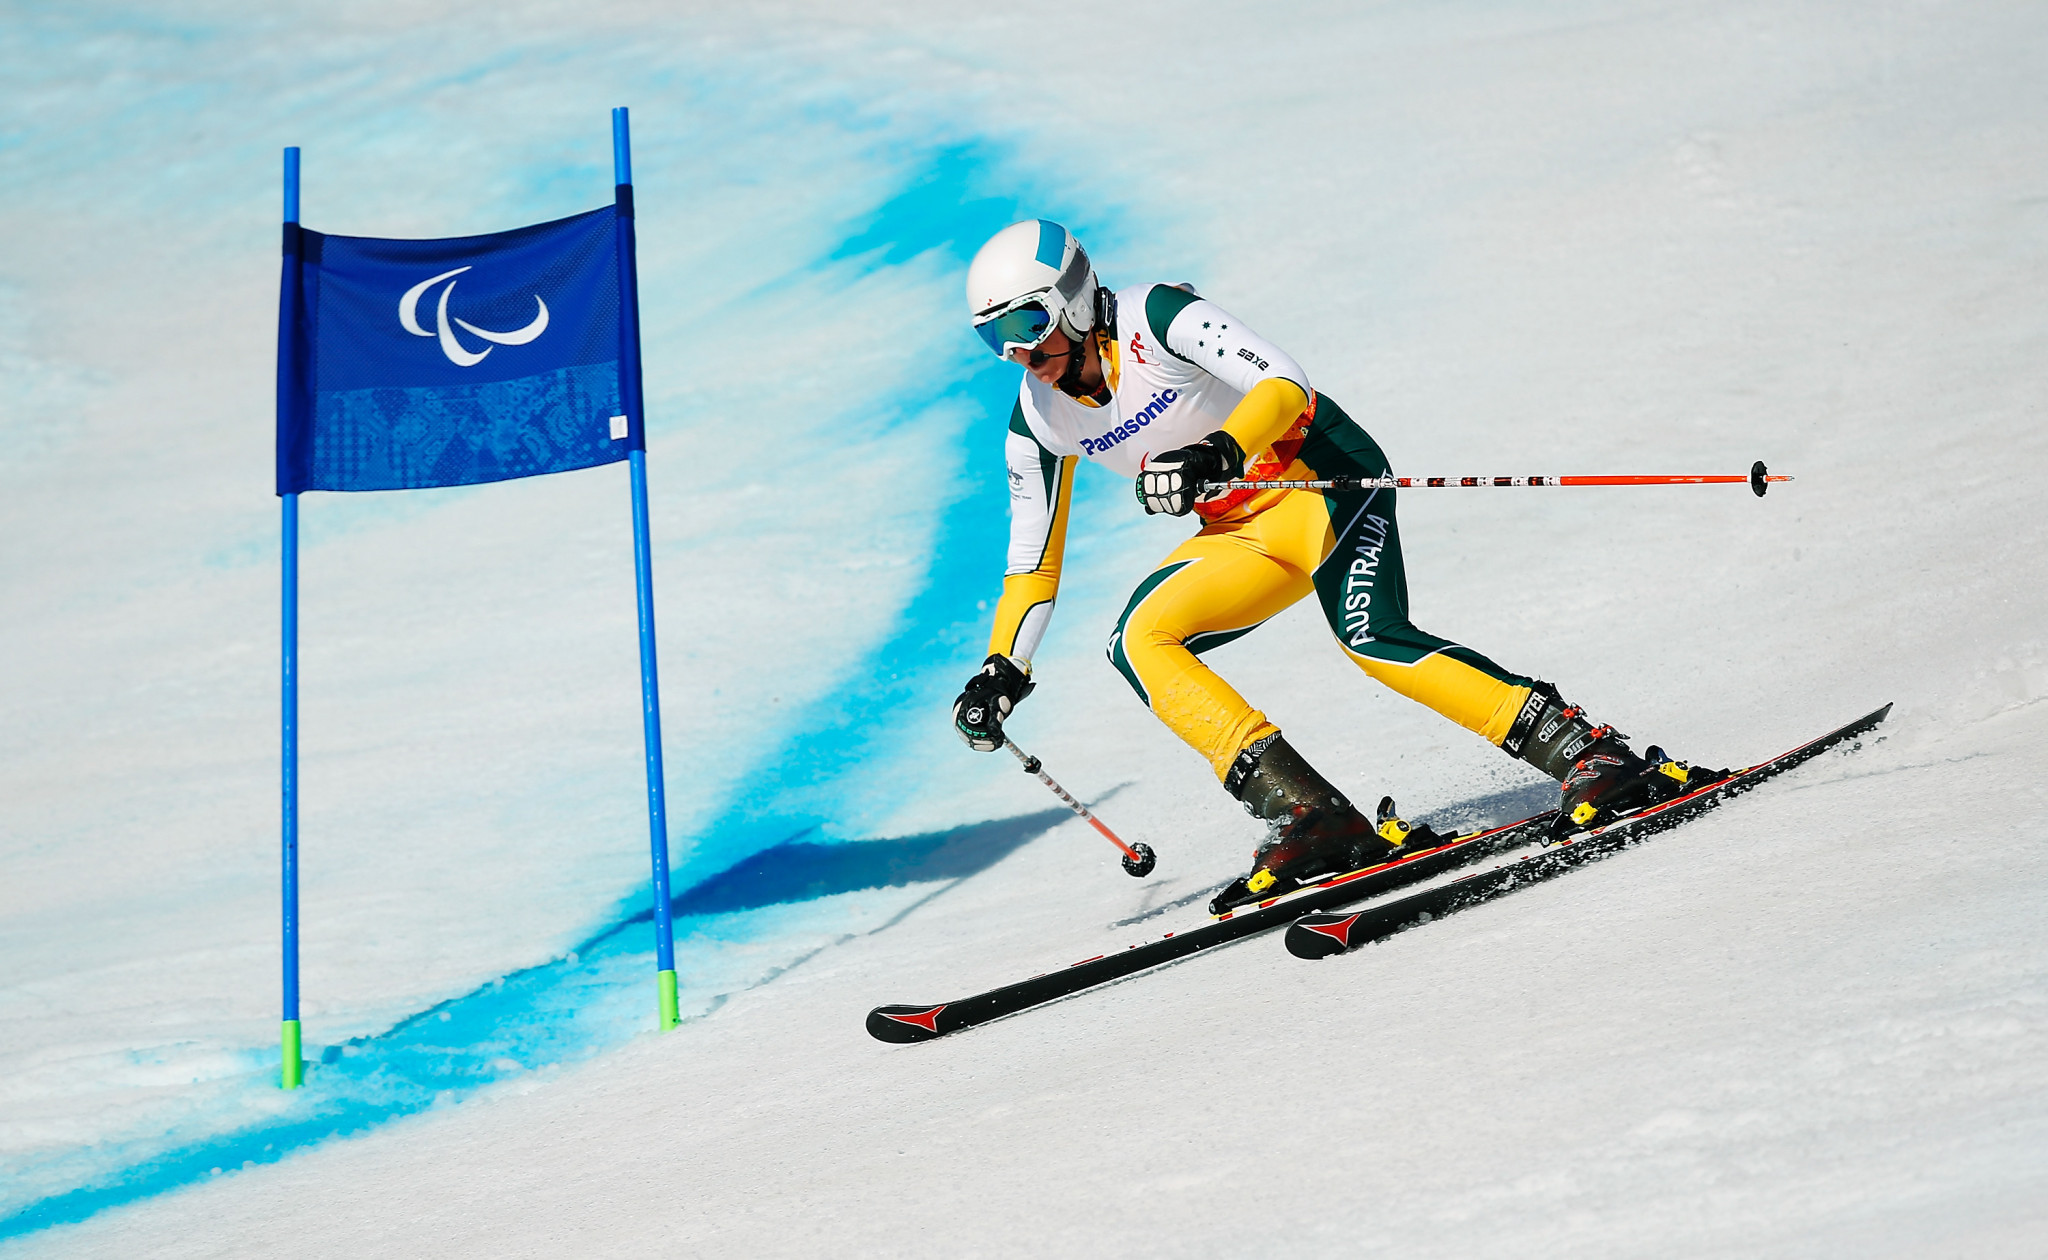 Australia are set to compete in Alpine skiing and snowboarding at the 2018 Winter Paralympic Games